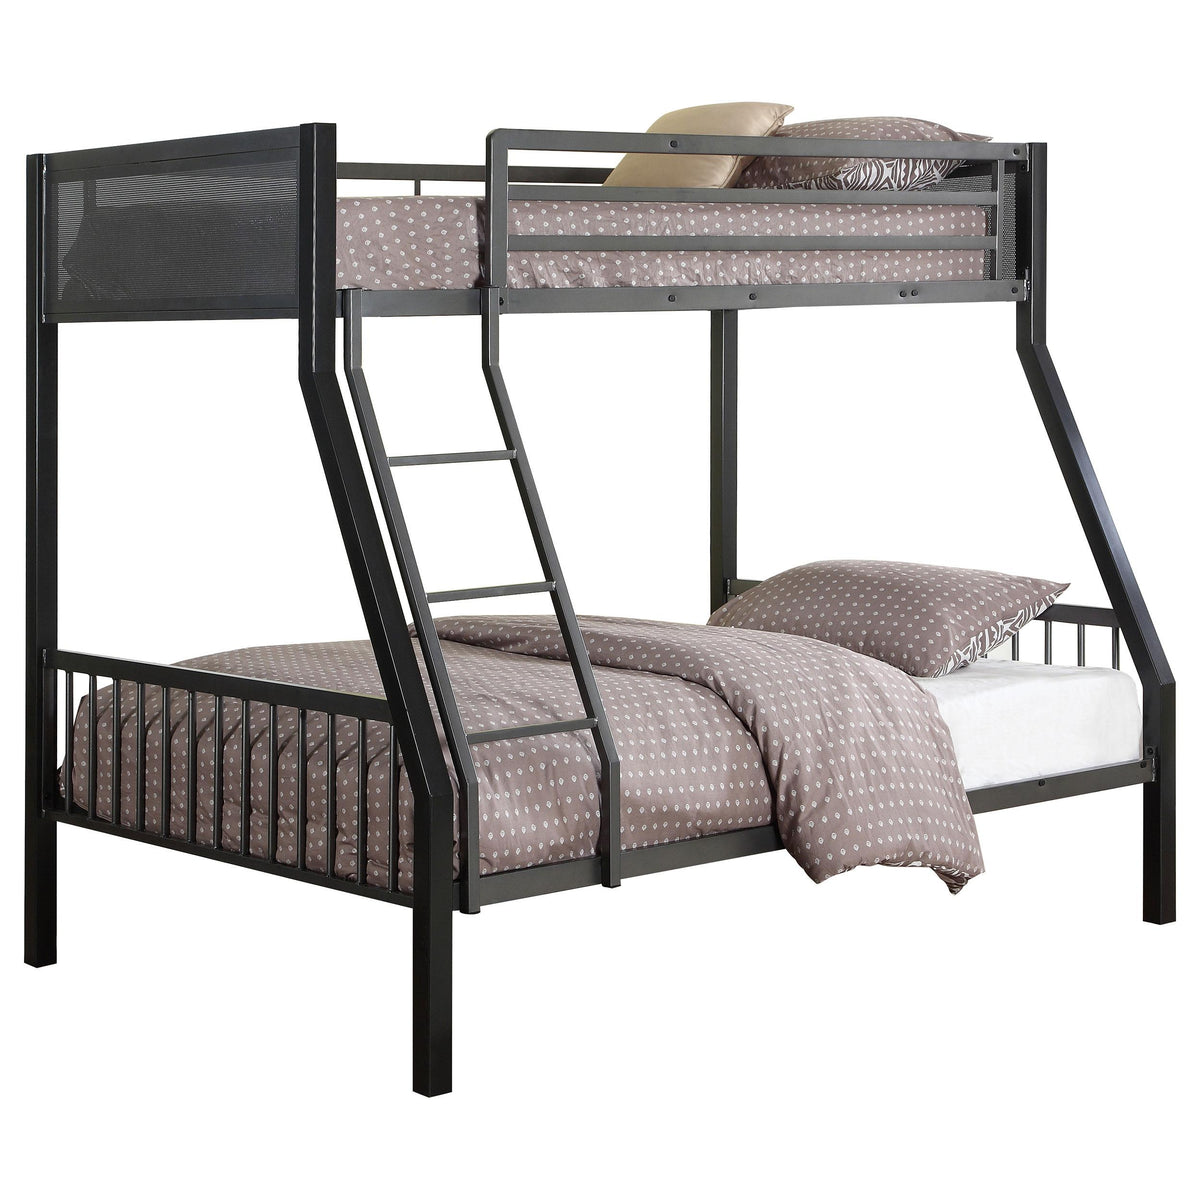 Meyers Twin Over Full Metal Bunk Bed Black and Gunmetal Meyers Twin Over Full Metal Bunk Bed Black and Gunmetal Half Price Furniture